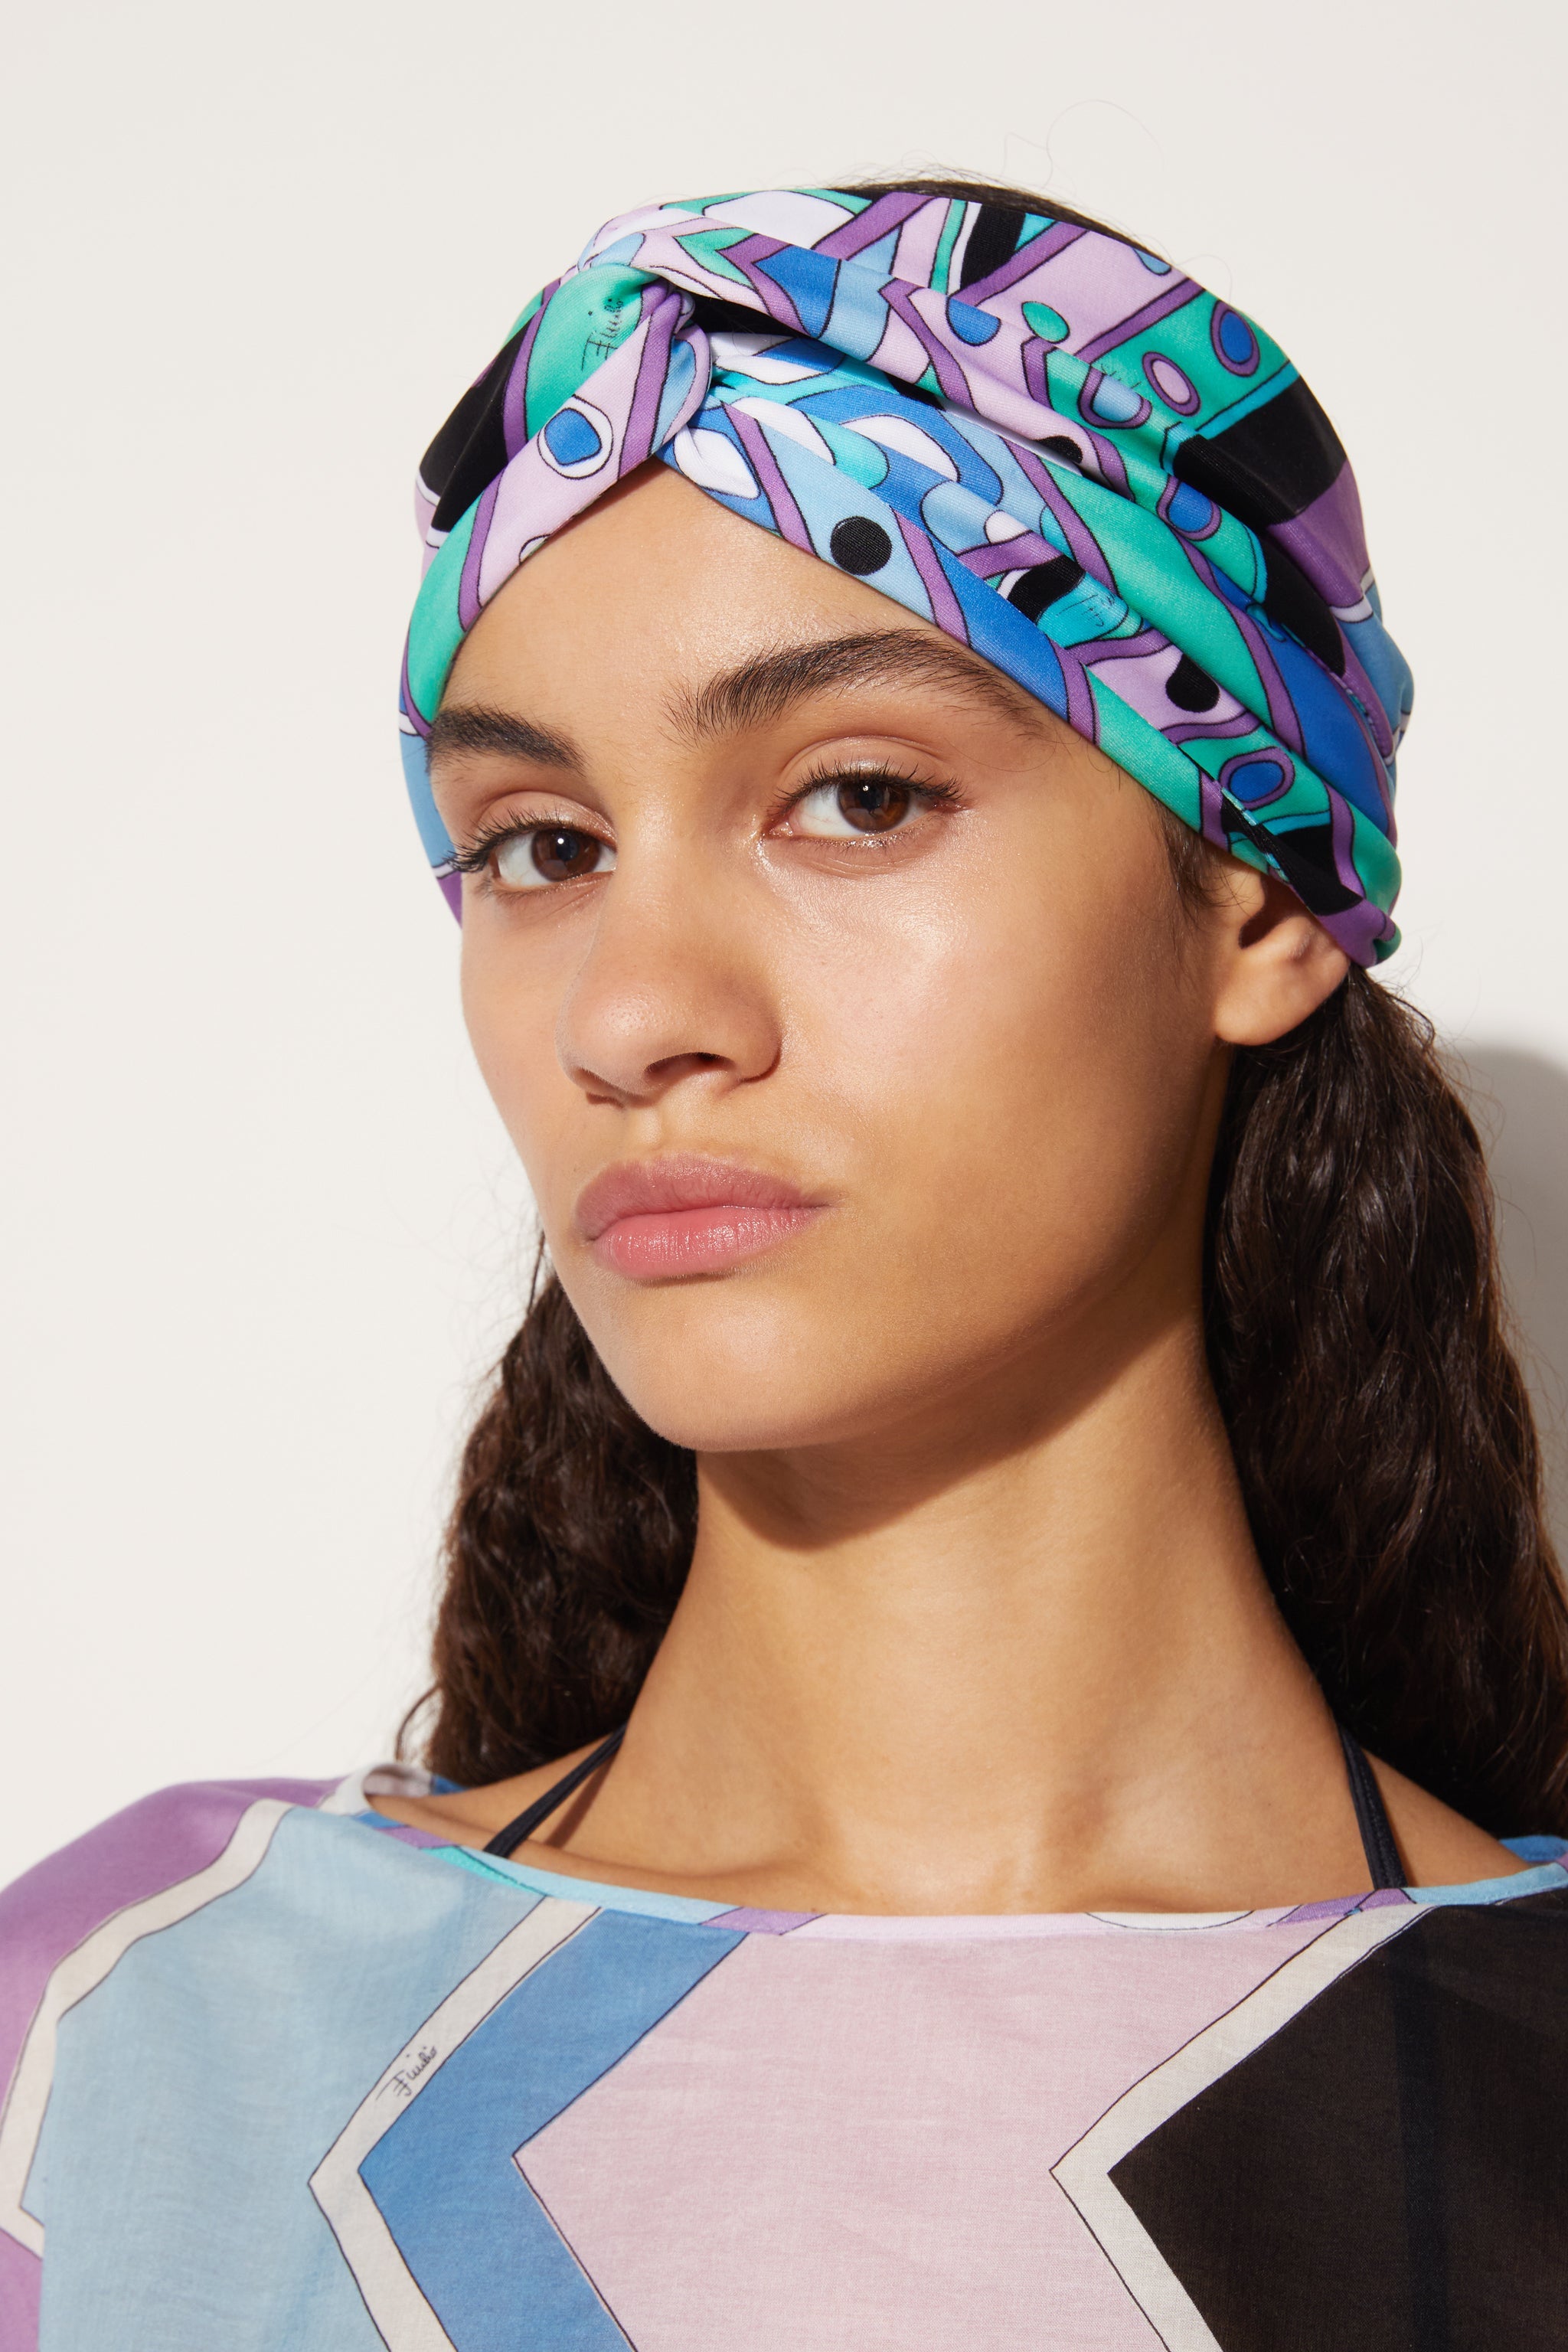 Pucci hat and hair accessories: luxury hat and hair accessories 